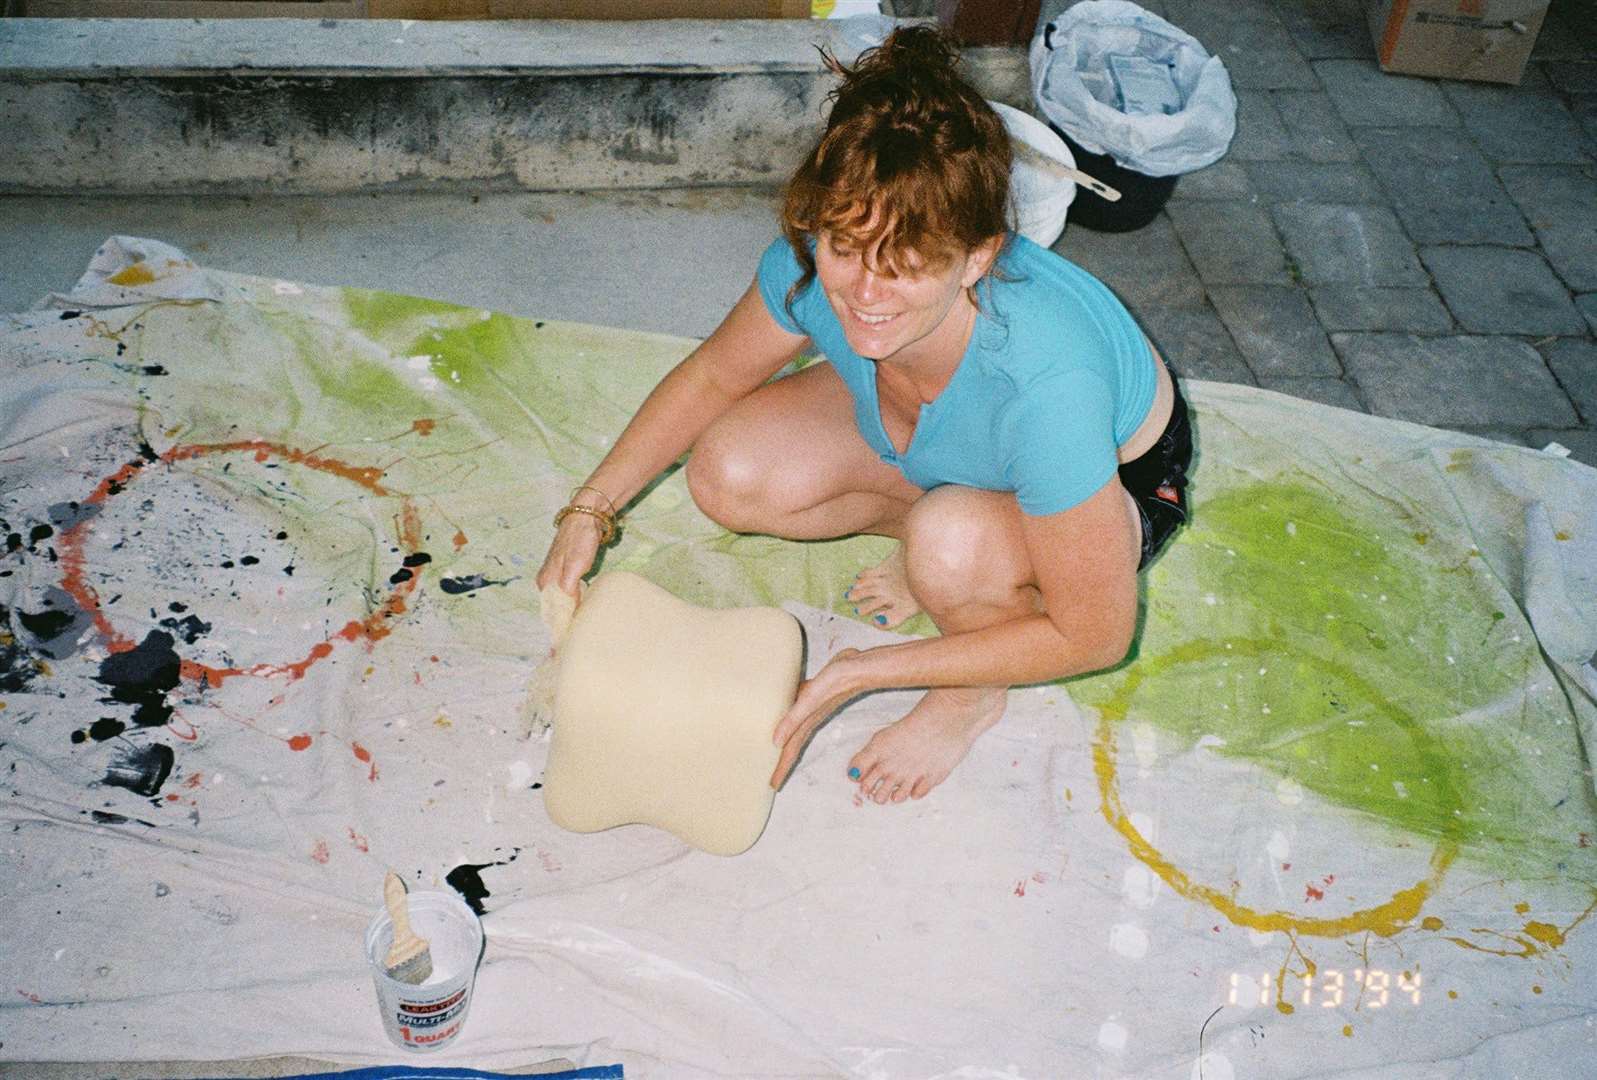 Phoebe pictured fabricating props in her garden for the music video Made You Look by Meghan Trainor. Picture: Phoebe Darling-Senner